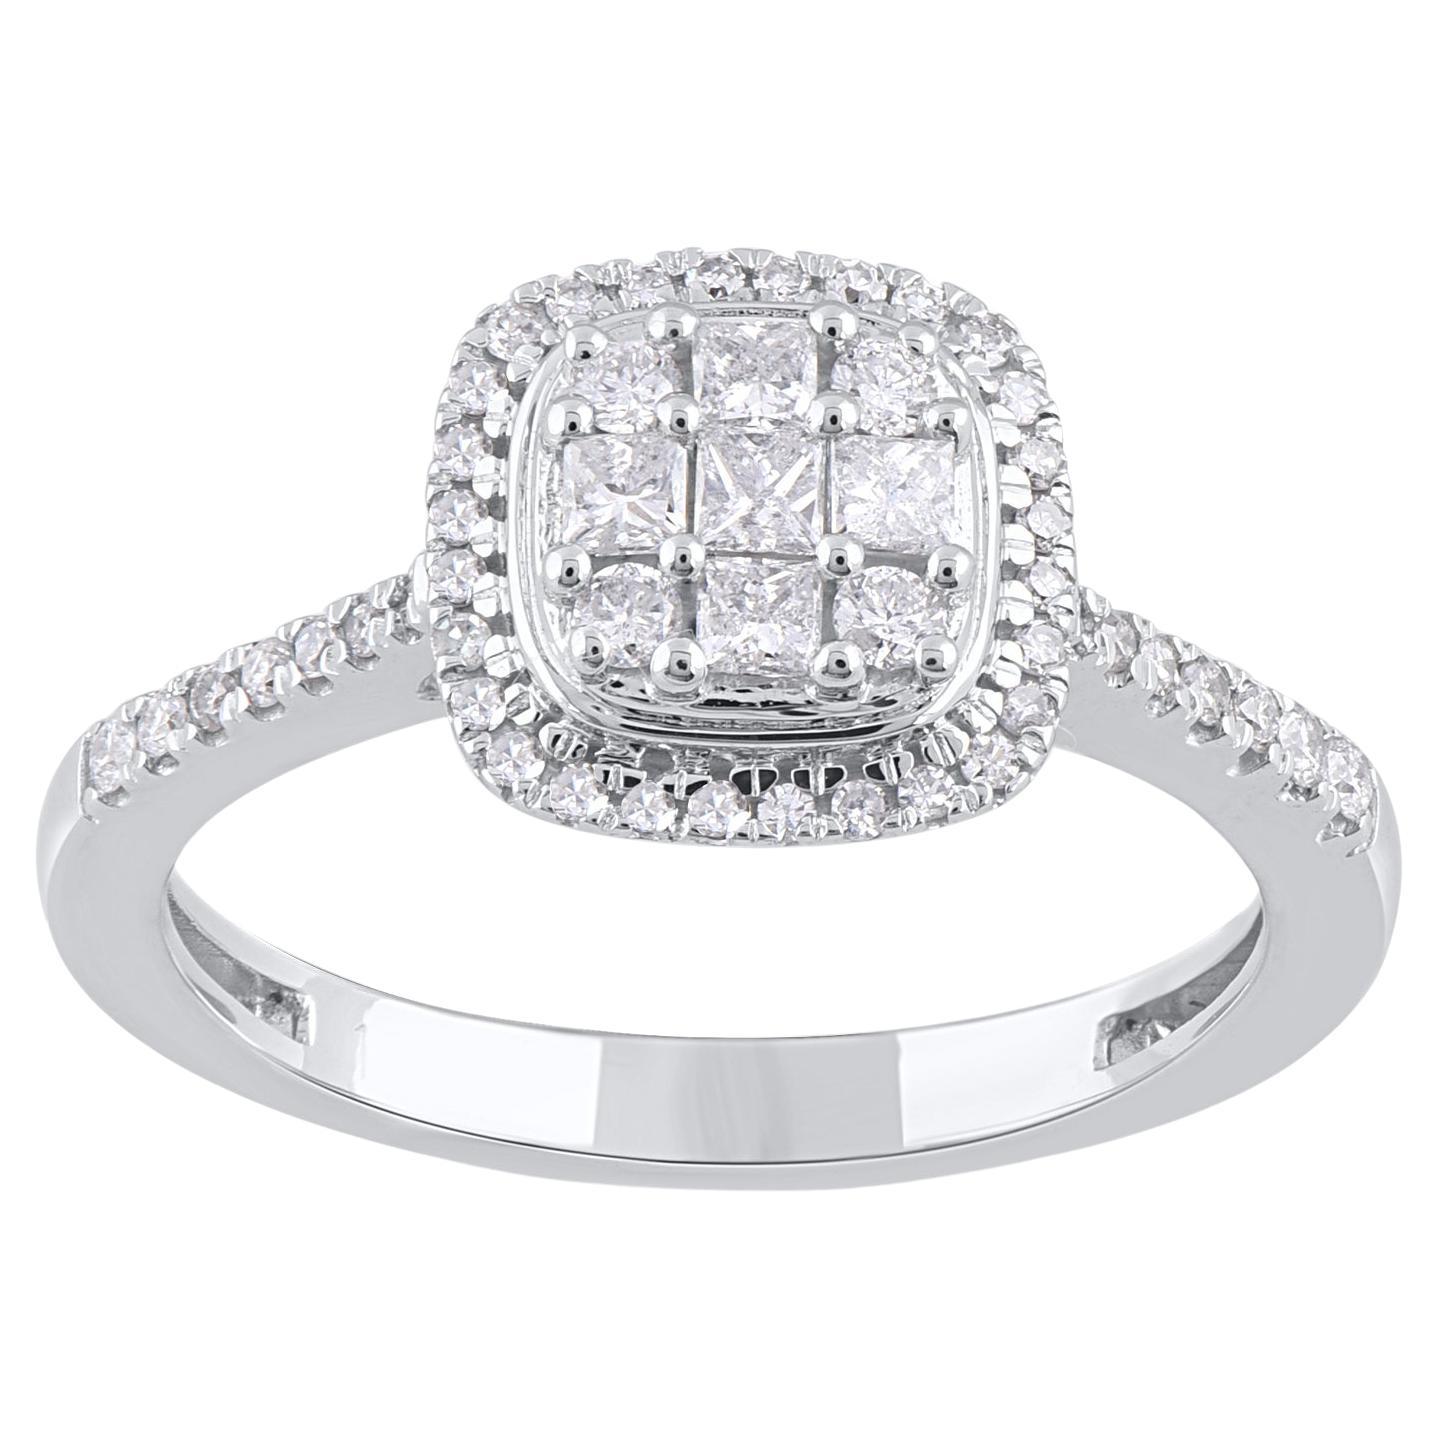 TJD 0.50 Carat Natural Princess & Round Diamond 14KT White Gold Engagement Ring For Sale